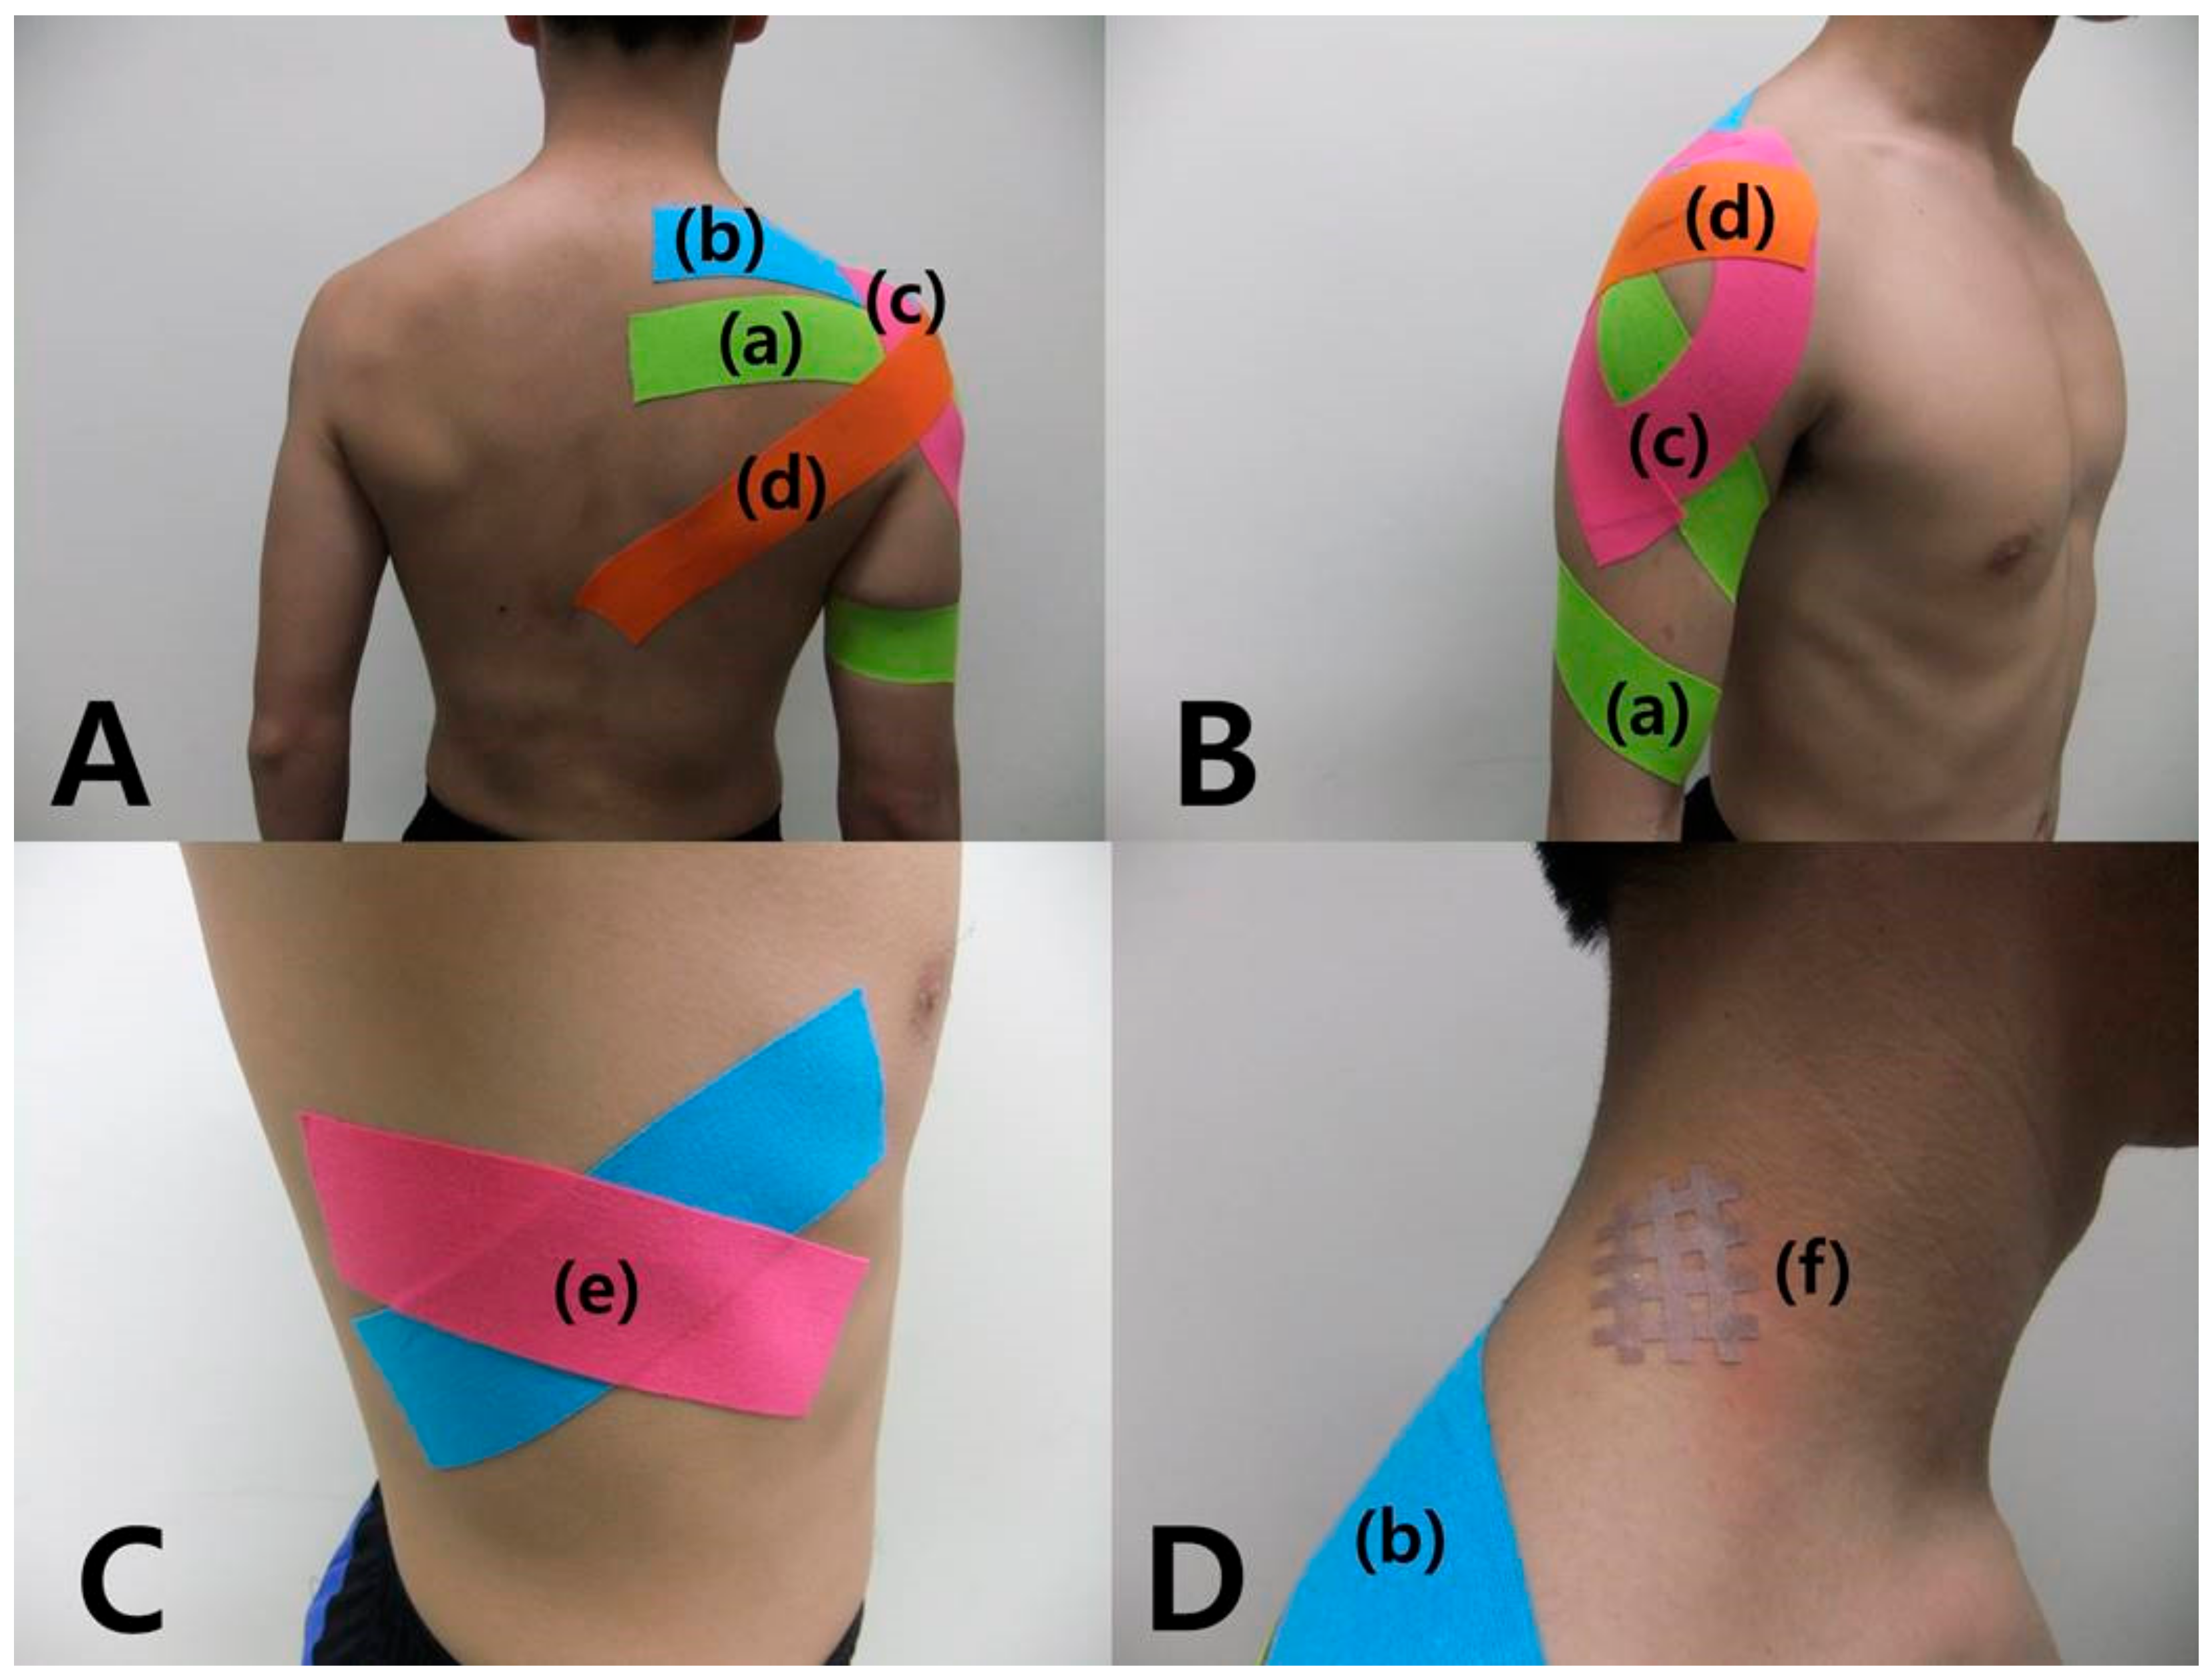 Medicina | Free Full-Text | Effect of Balance Taping Using Kinesiology Tape  and Cross Taping on Shoulder Impingement Syndrome: A Case Report